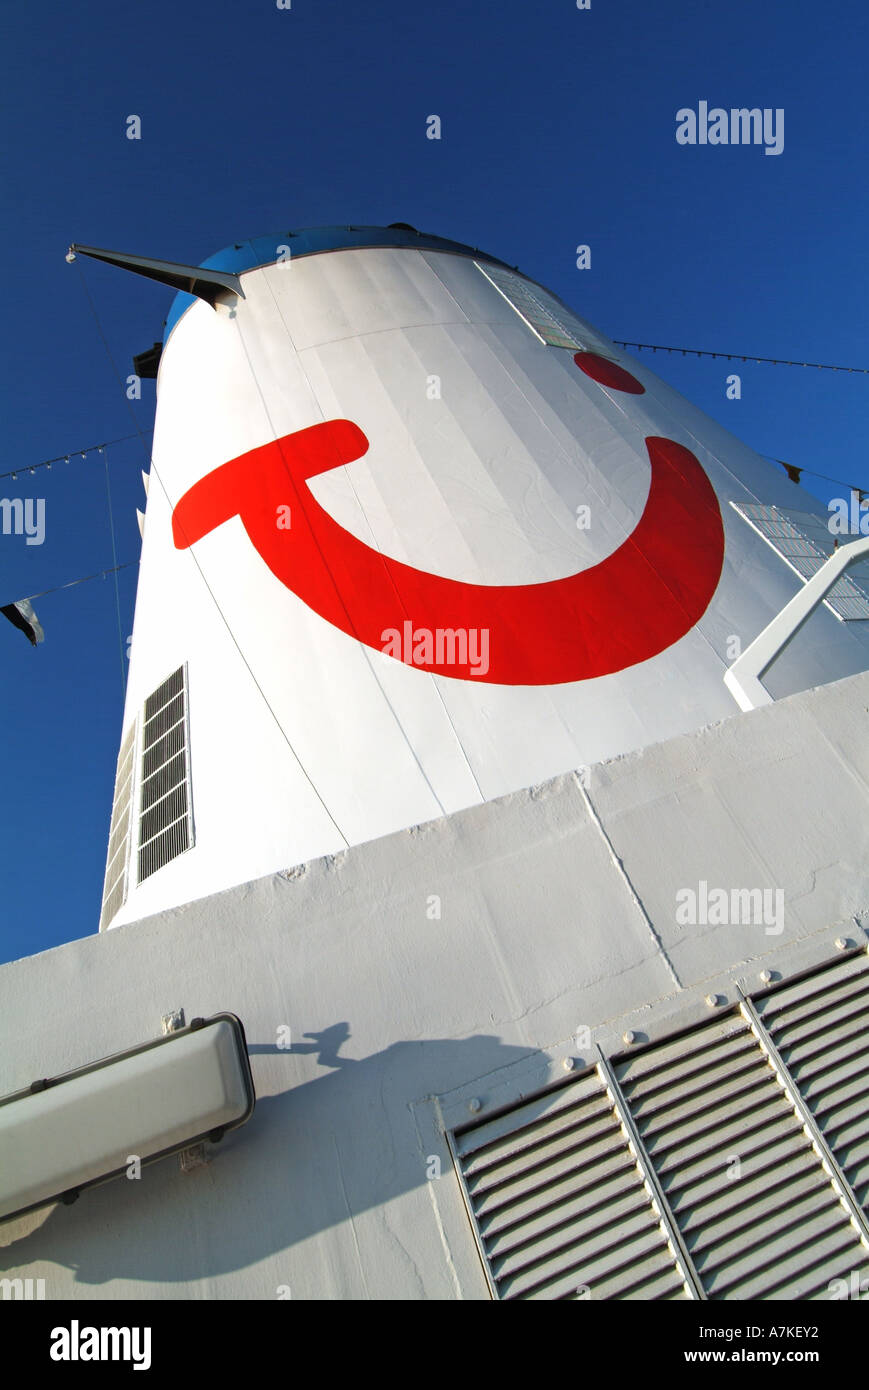 Skywards view of cruise ship funnel with the Thomson logo Stock Photo